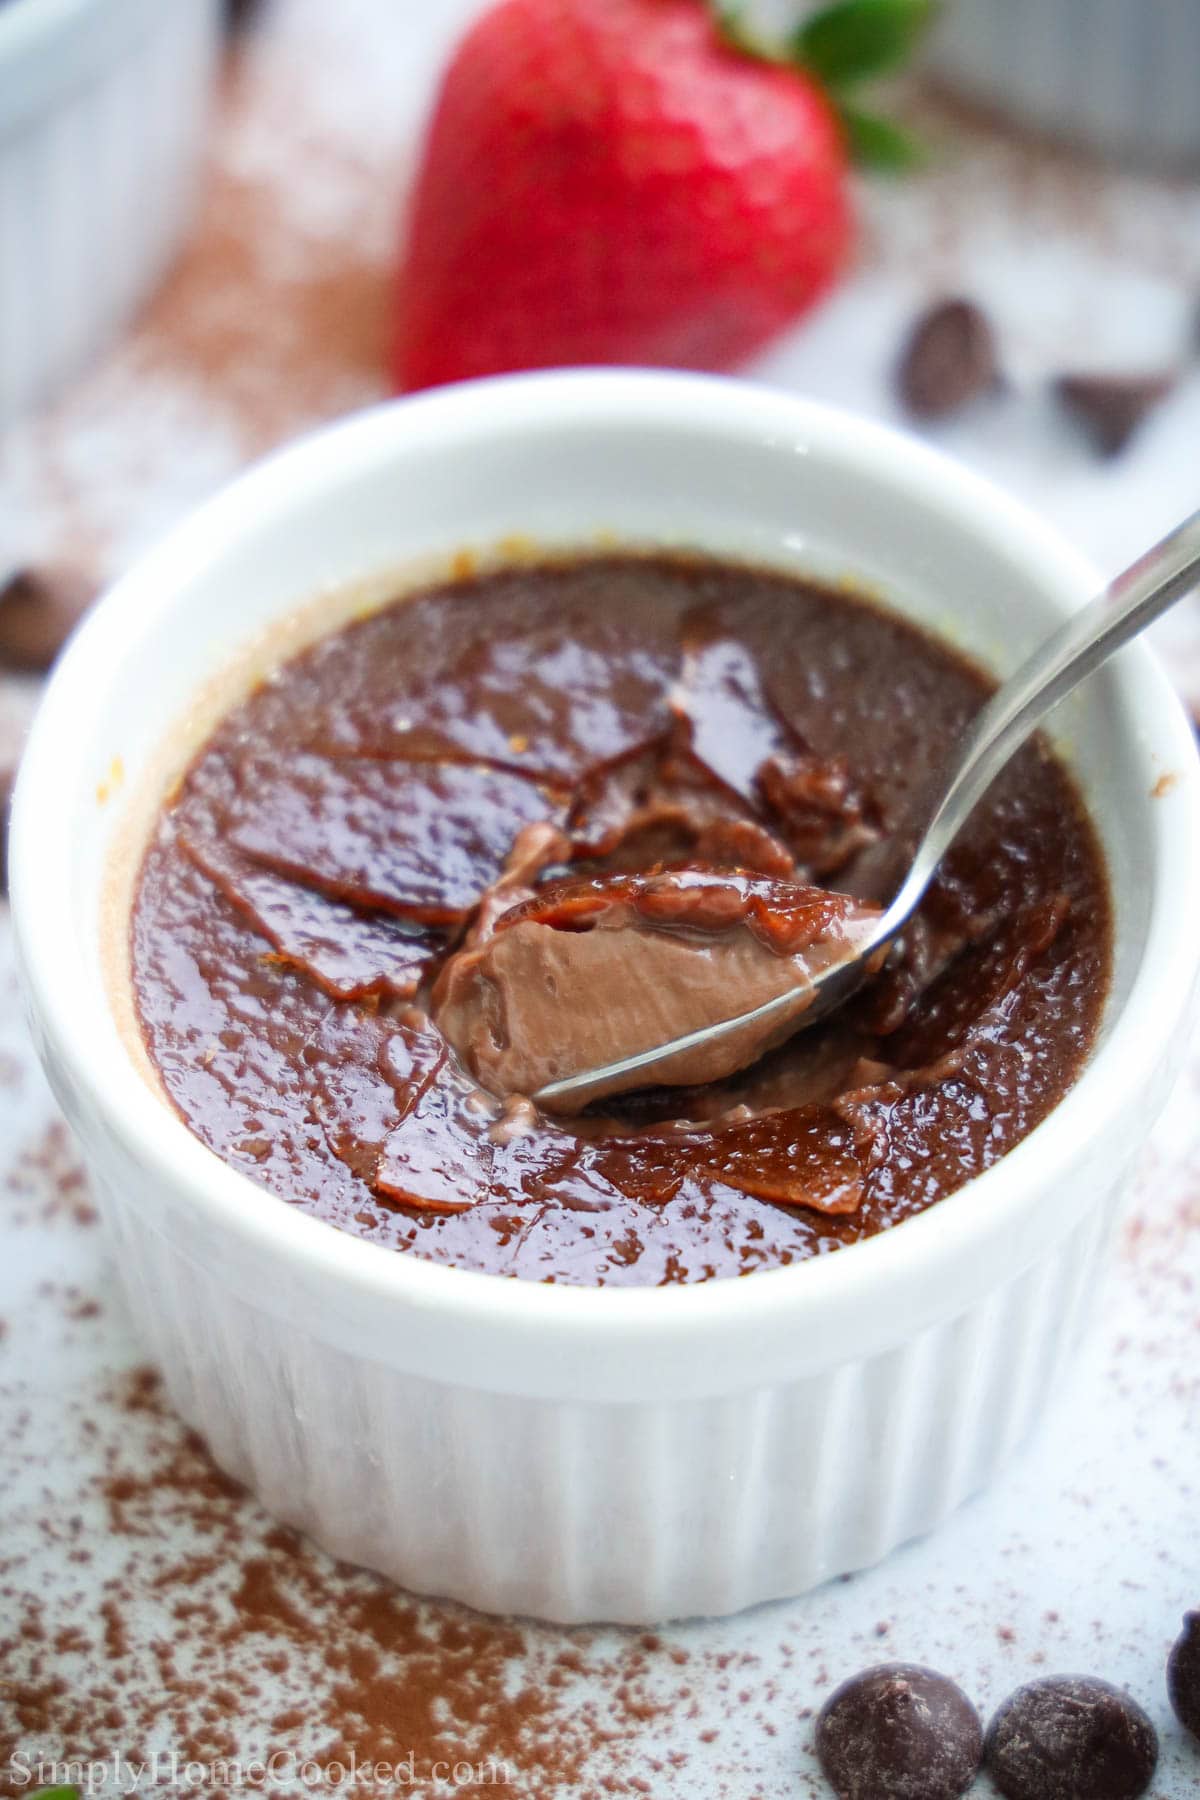 Chocolate Creme Brulee with a spoonful being lifted out